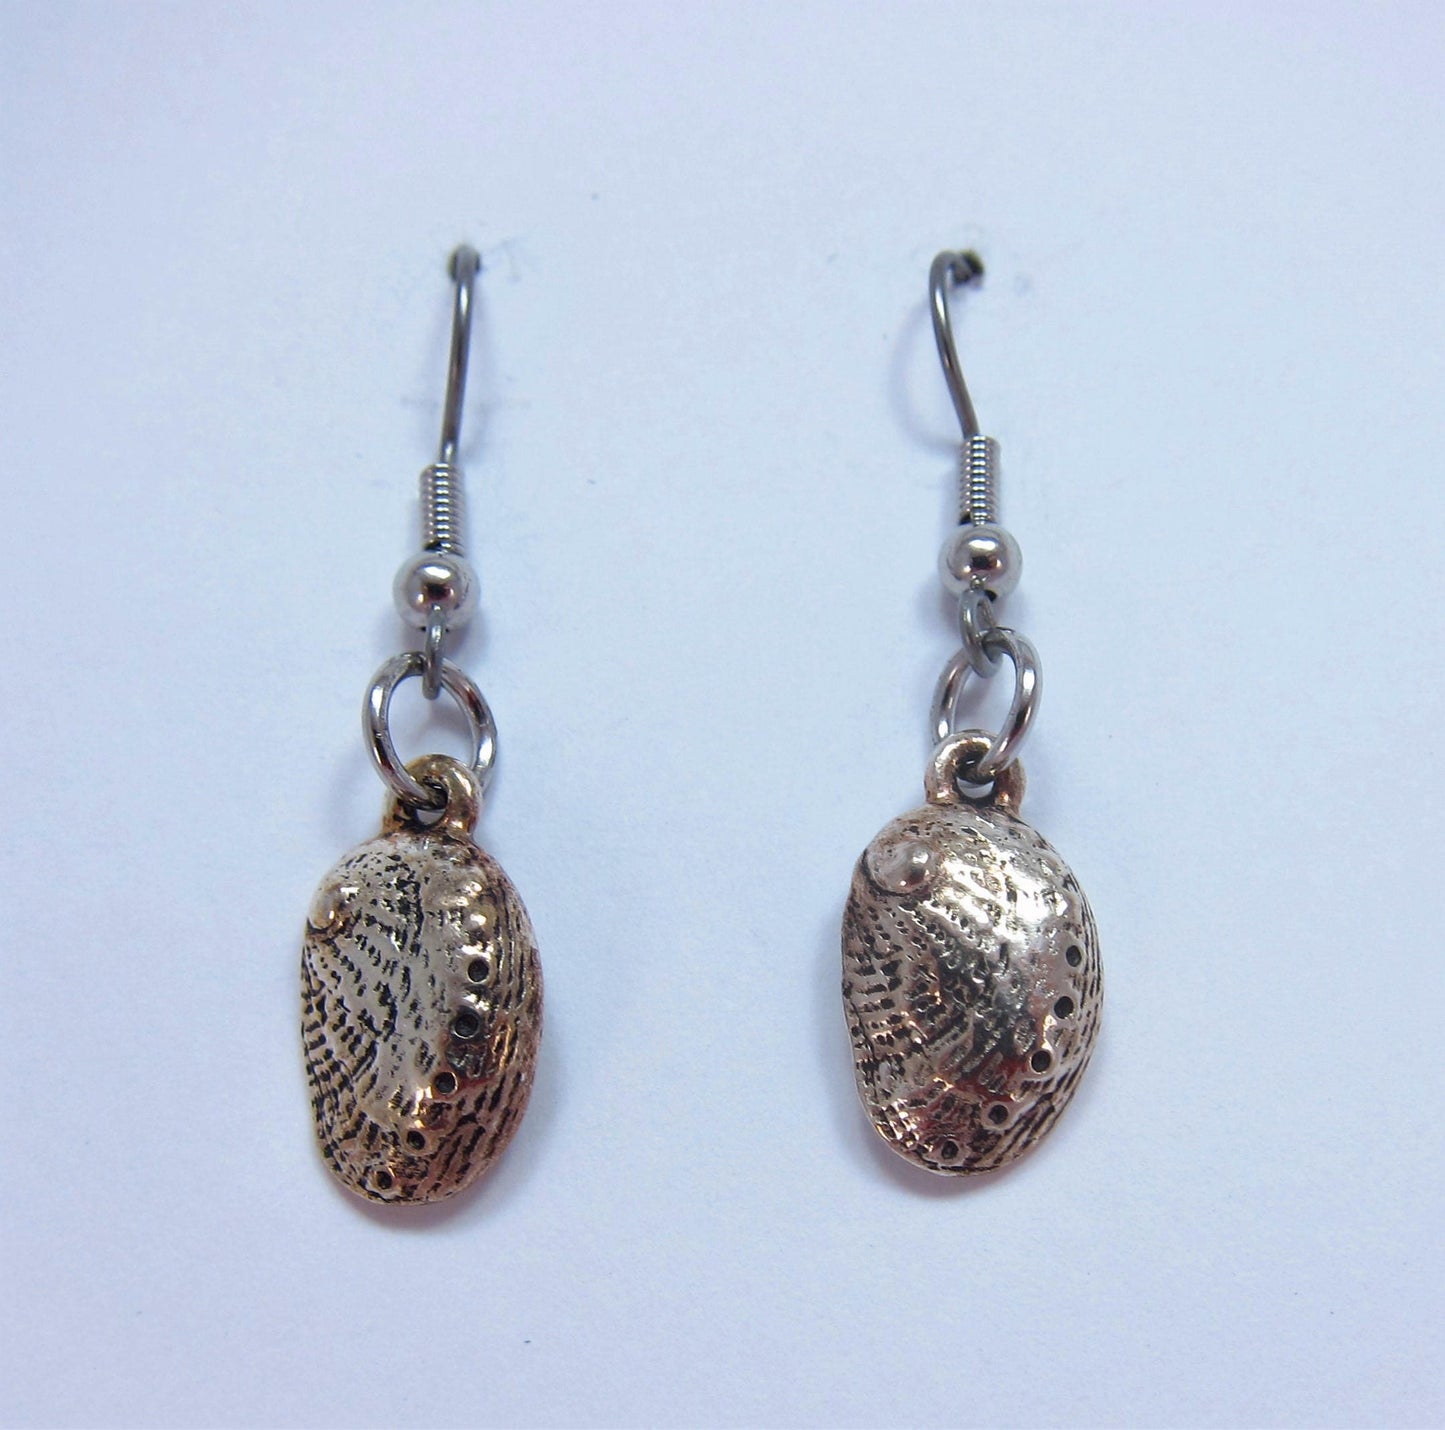 Charmed! Abalone shell earrings silver plate antique finish on hypoallergenic surgical steel hooks